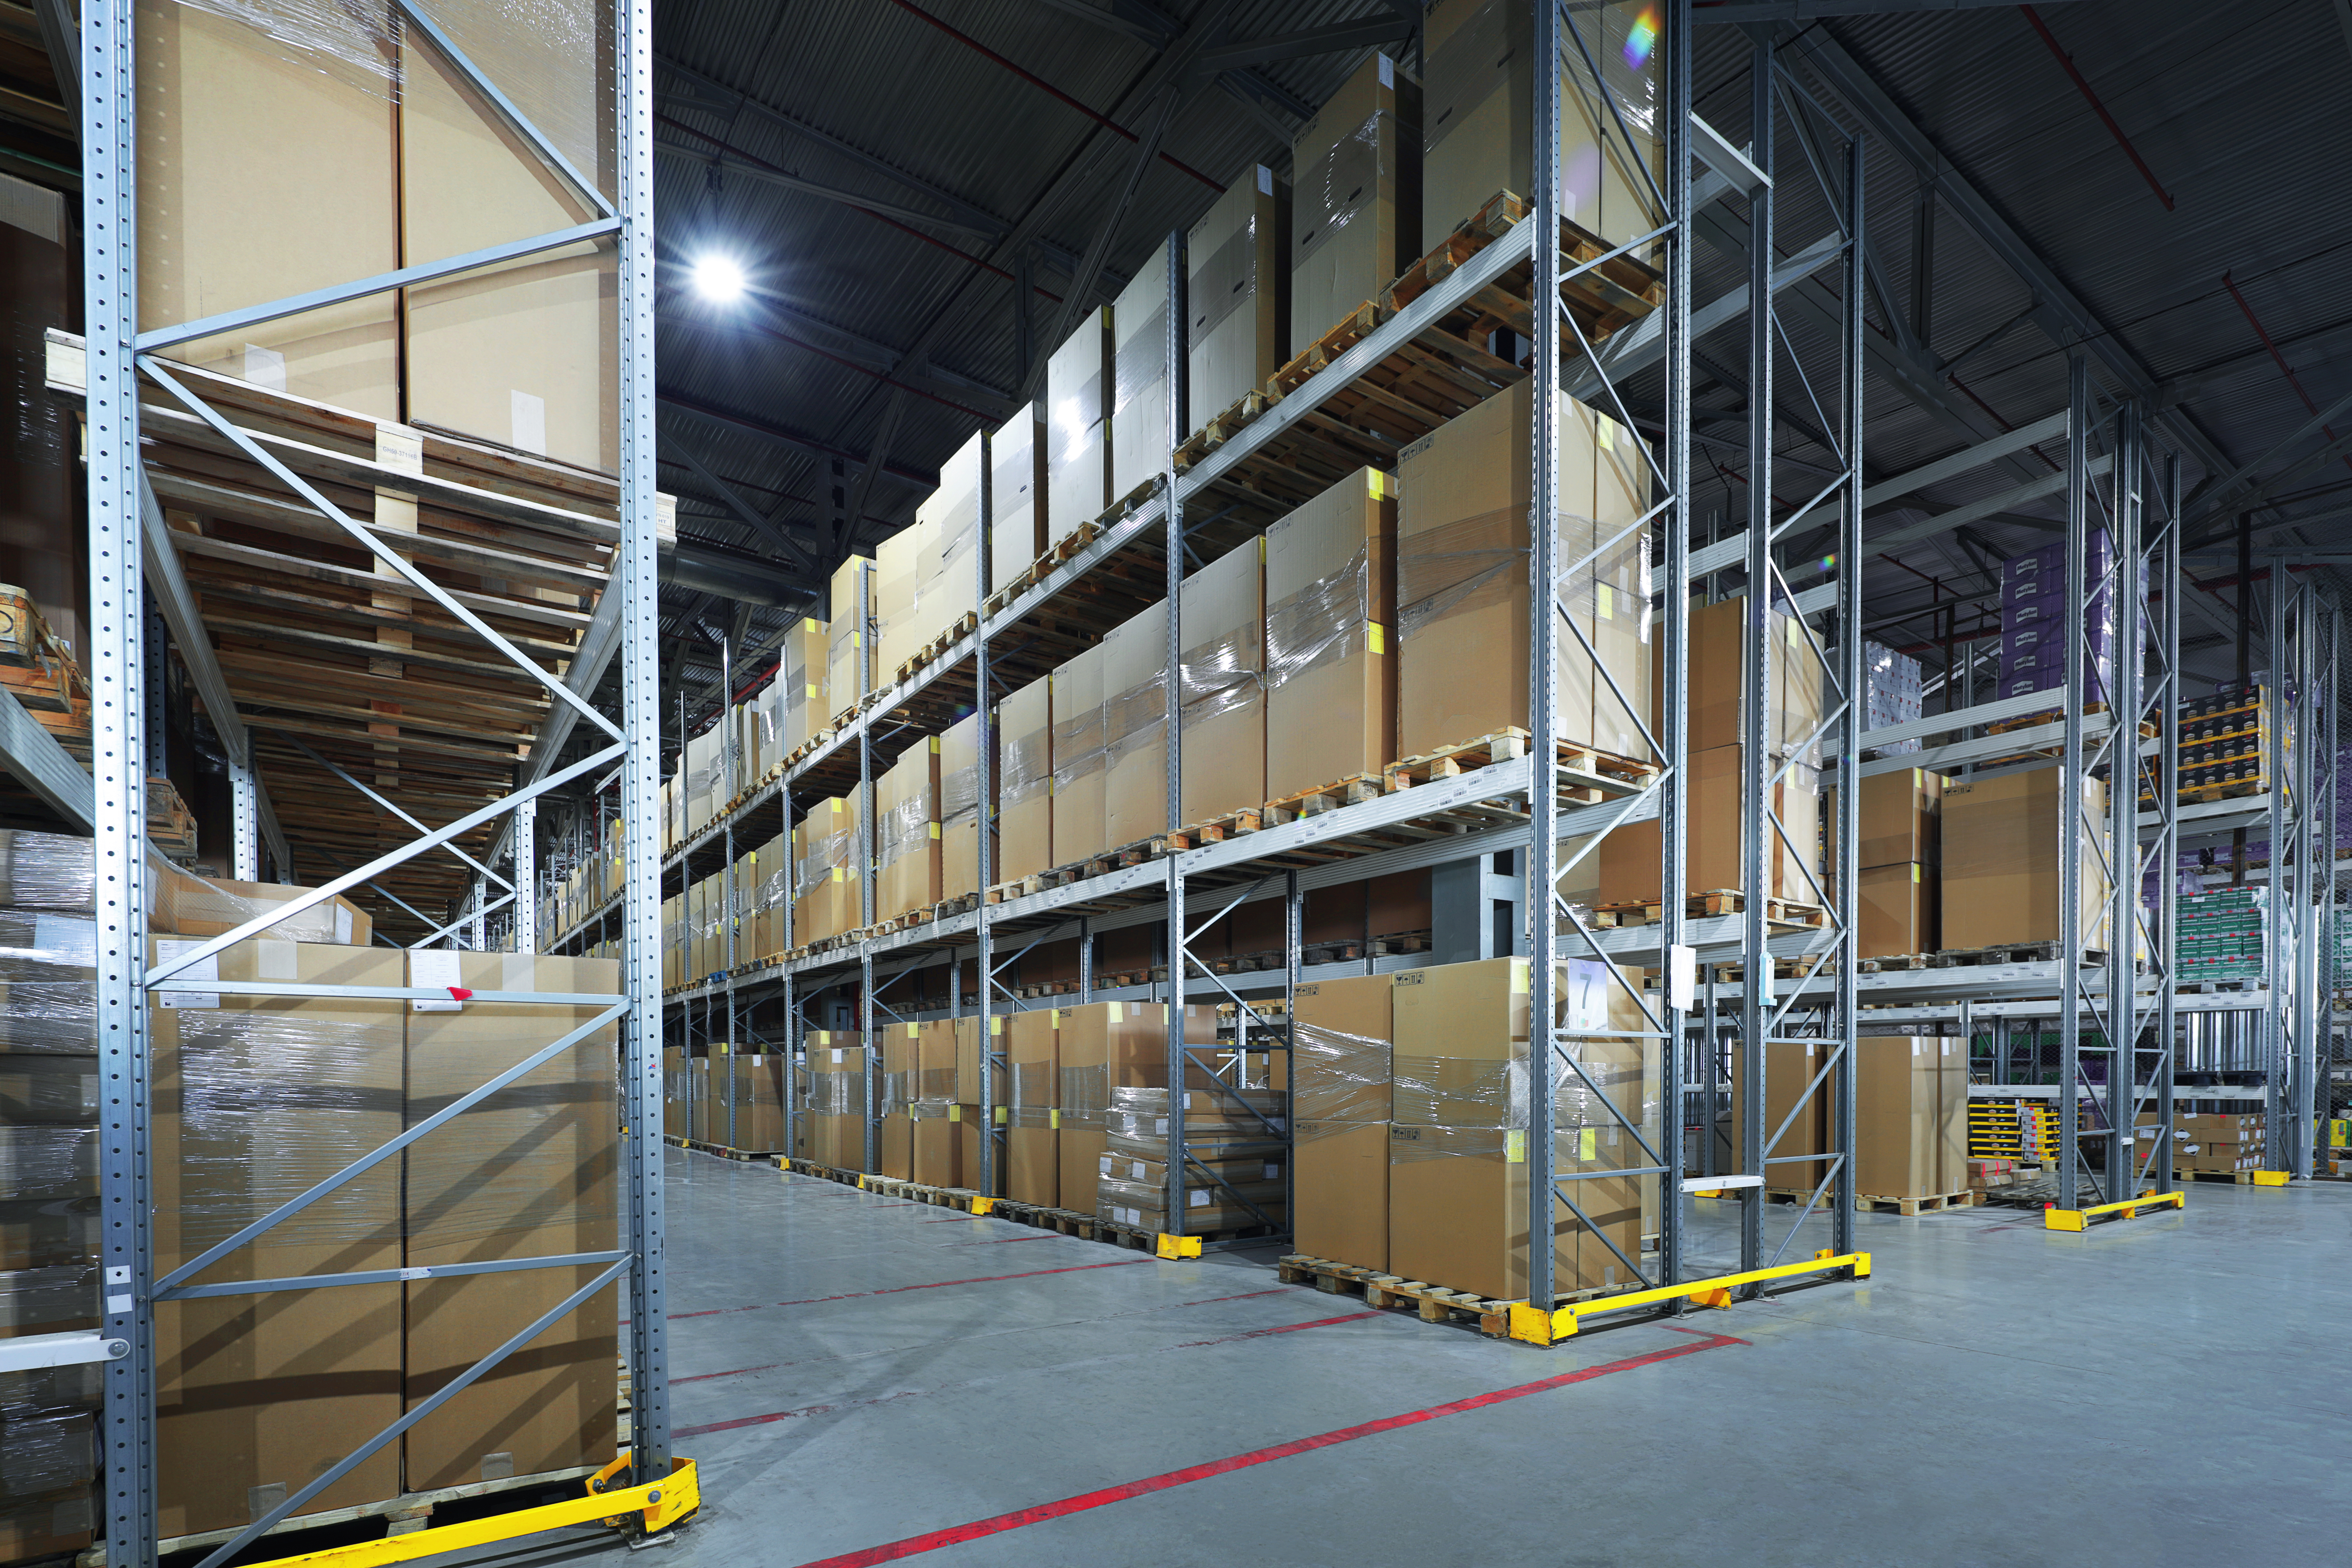 Circulation of goods at secure storage warehouse by example of BOSCH